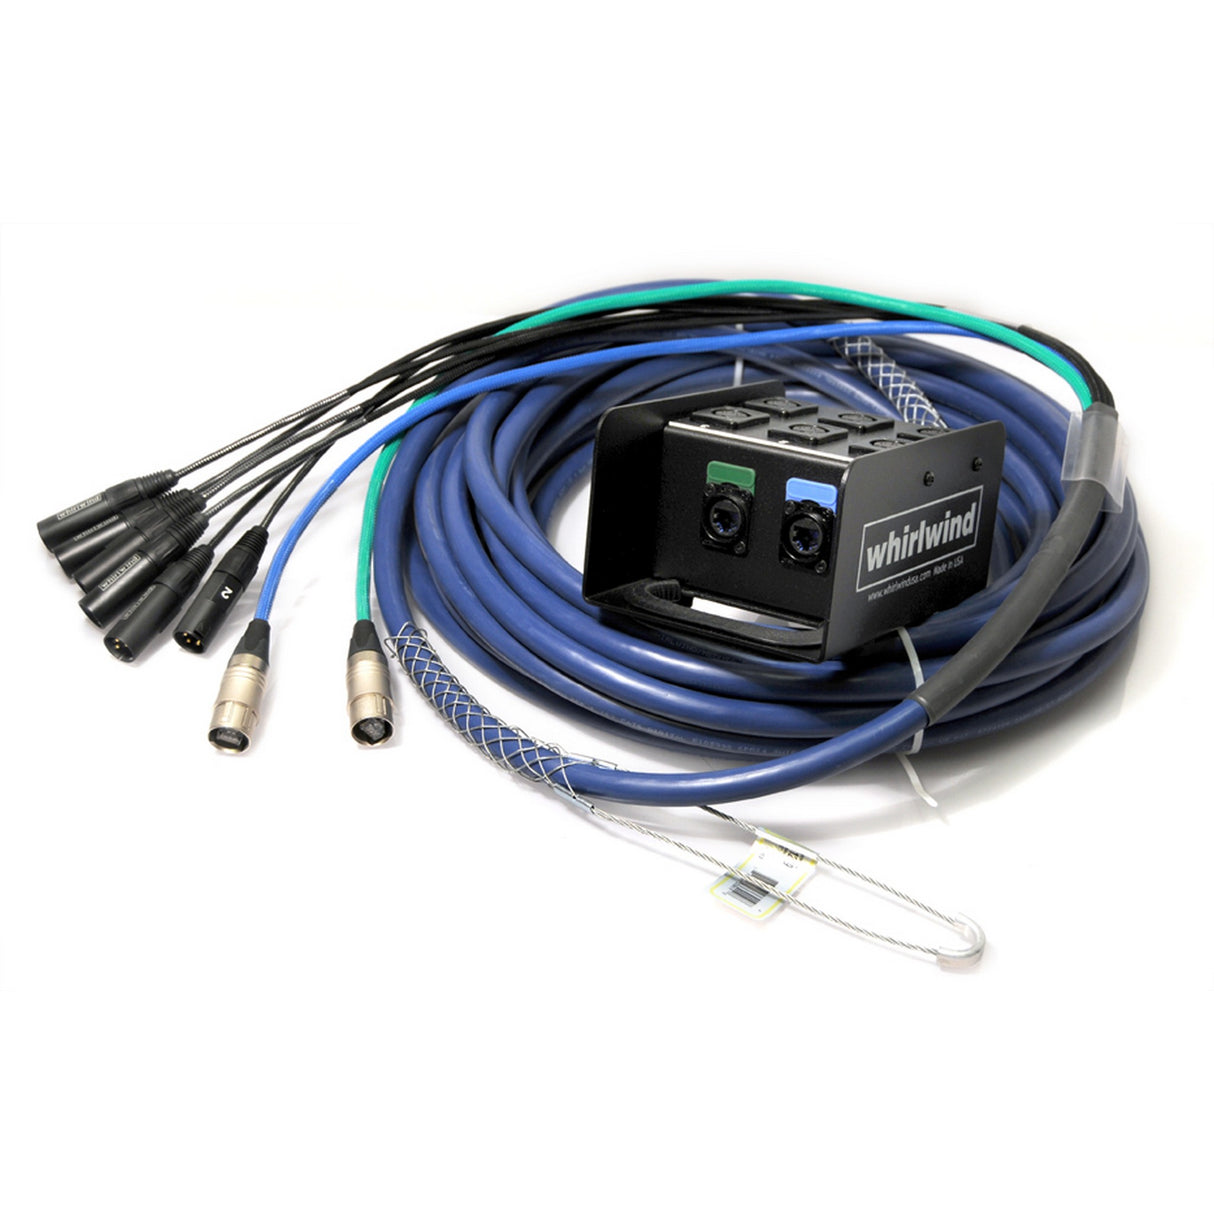 Whirlwind MD-6-2-C6-050 MEDUSA 6 XLR Inputs 2 CAT6 Lines with CAT5e Ethercon Snake Cable, 50-Feet